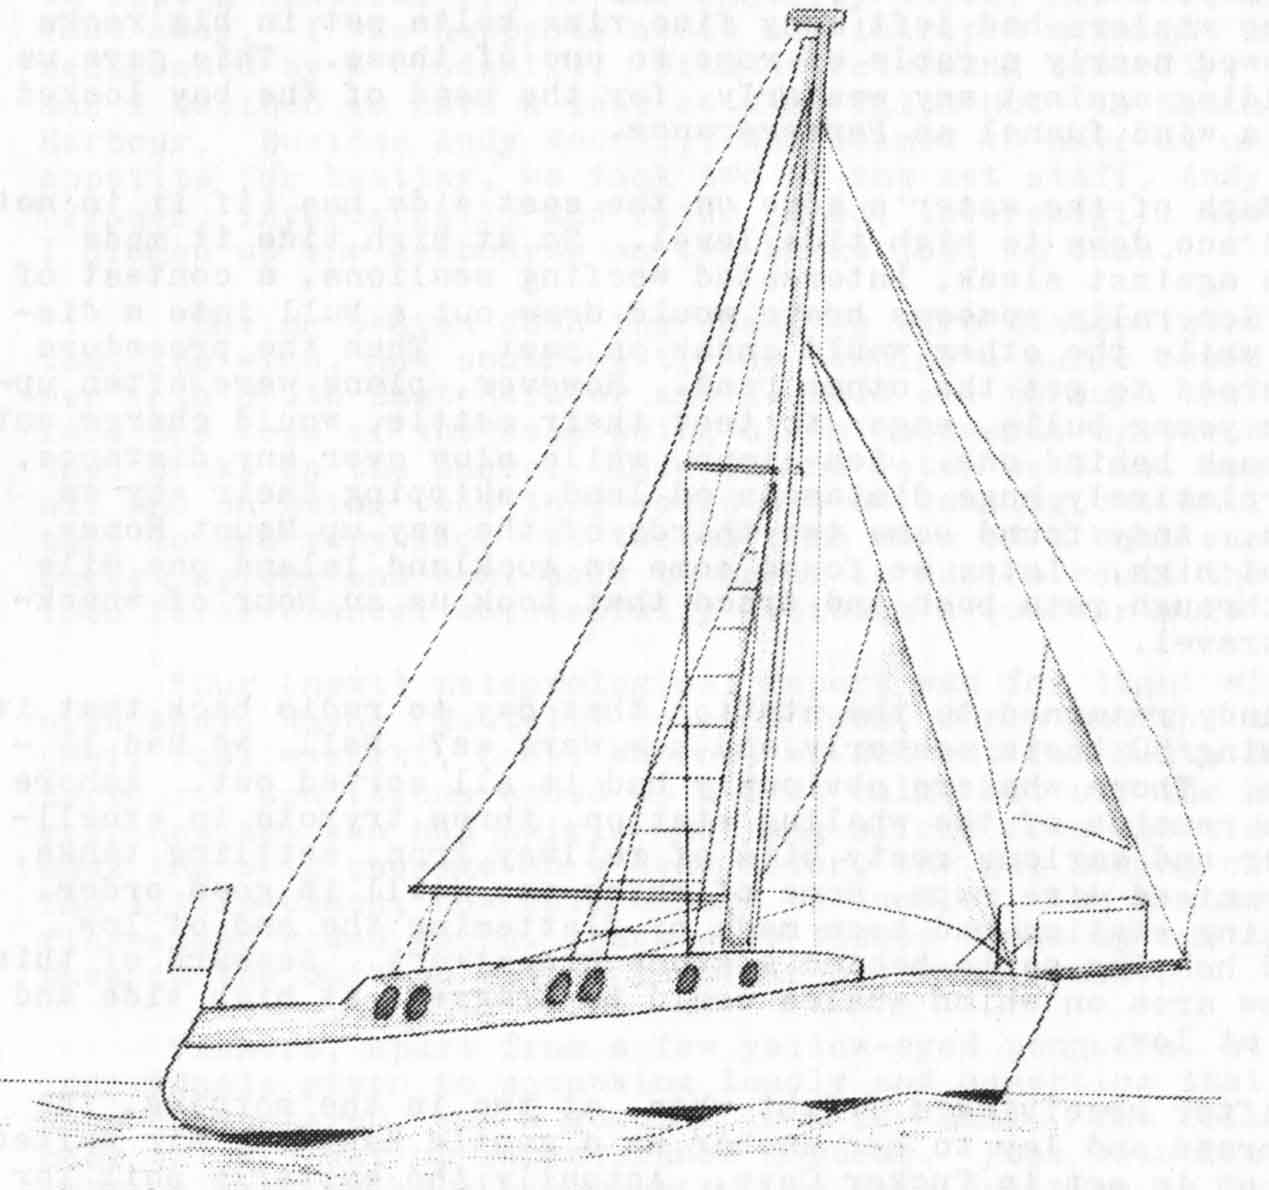 Sketch of the yacht Valya at Campbell Island